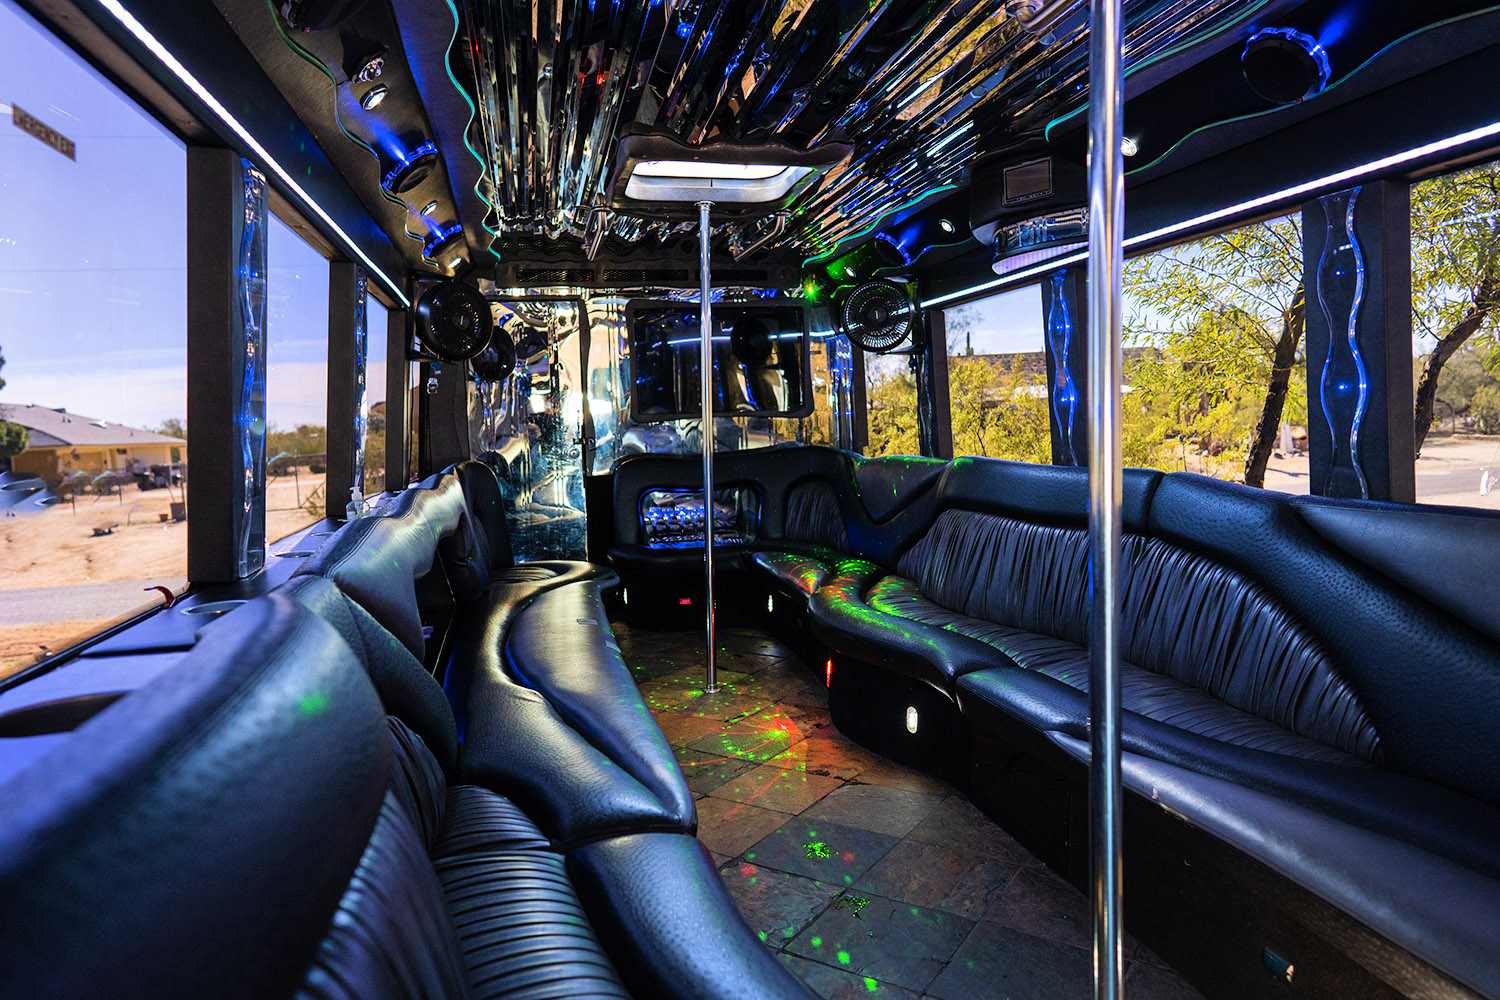 Interior of Bachelor Party Bus with stripper poles